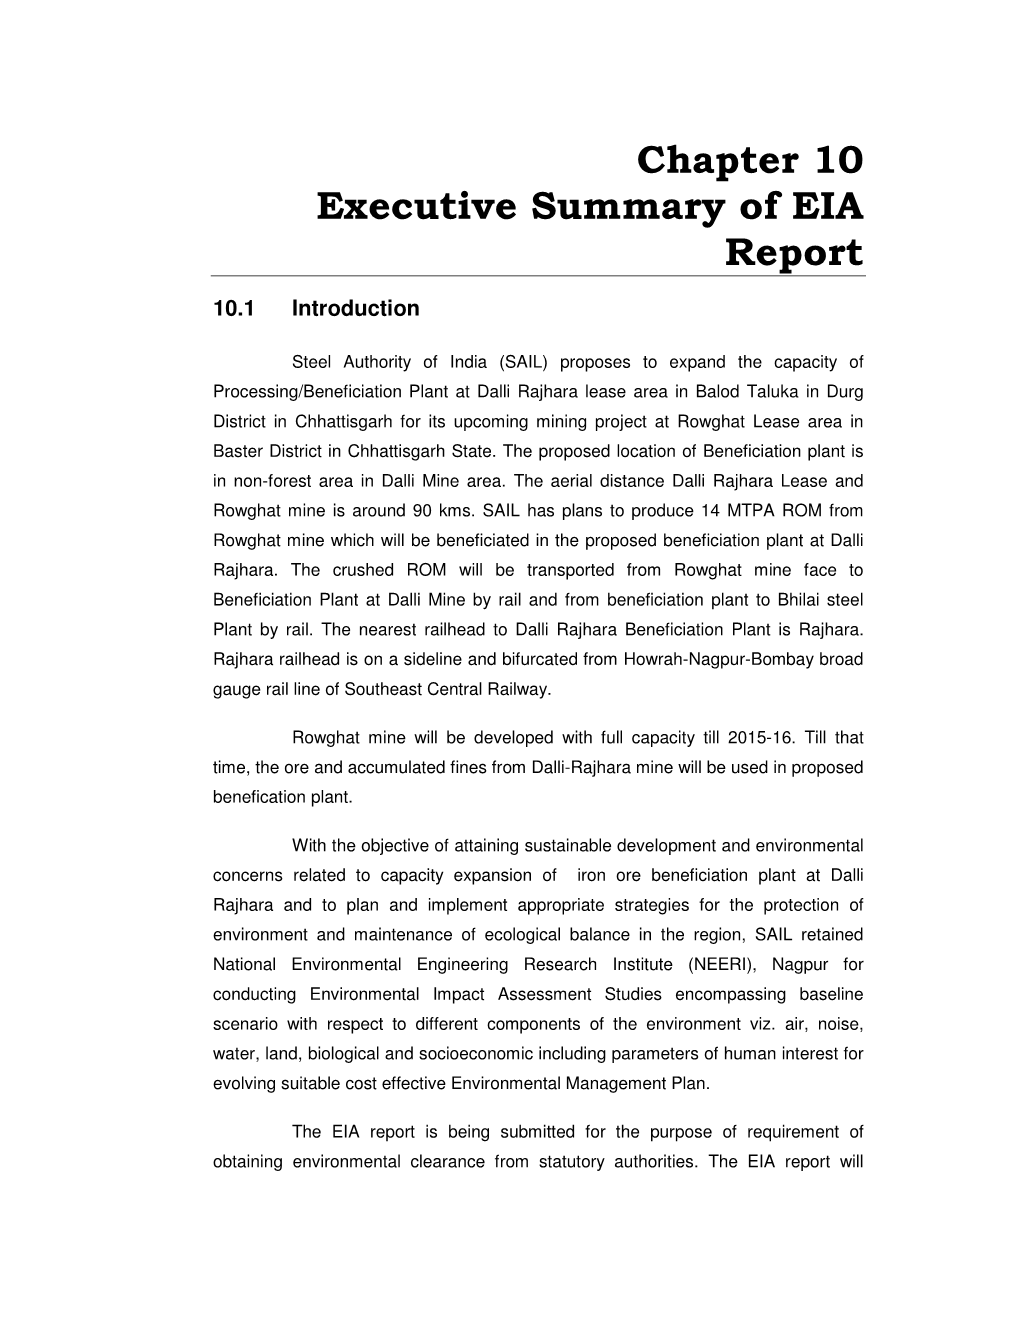 Chapter 10 Executive Summary of EIA Report